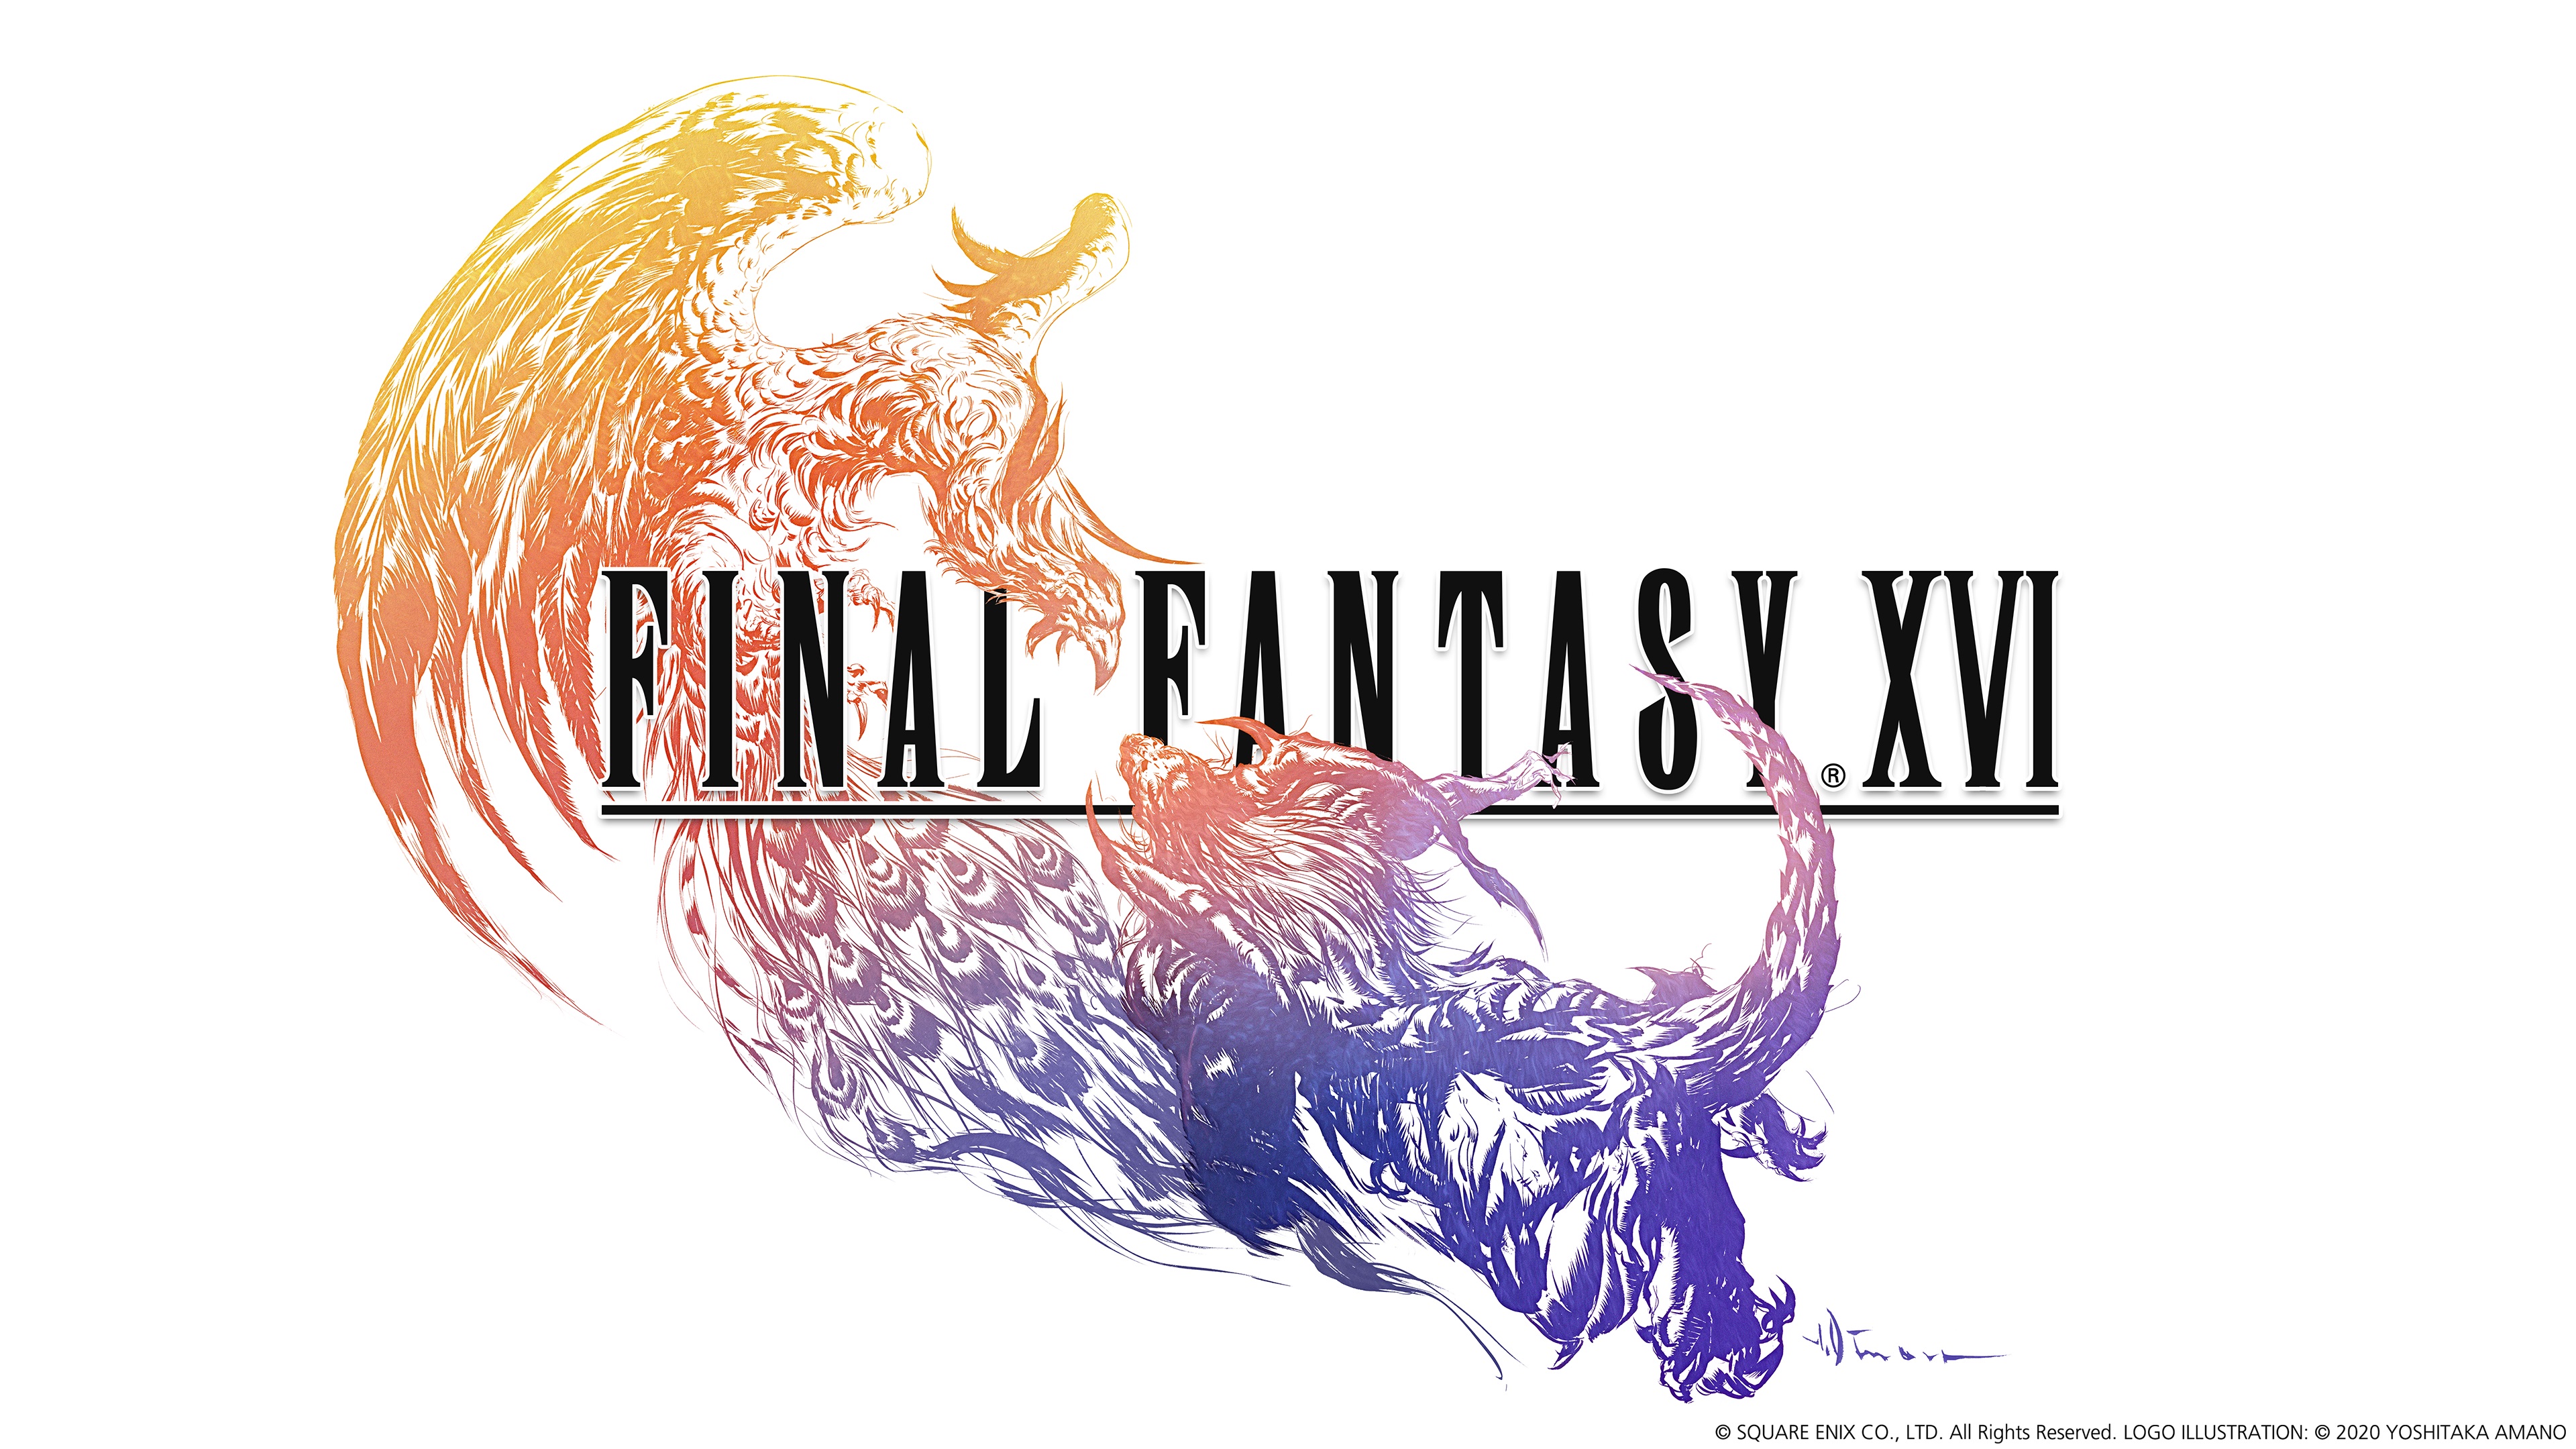 Final Fantasy Xvi HD Wallpaper And Background